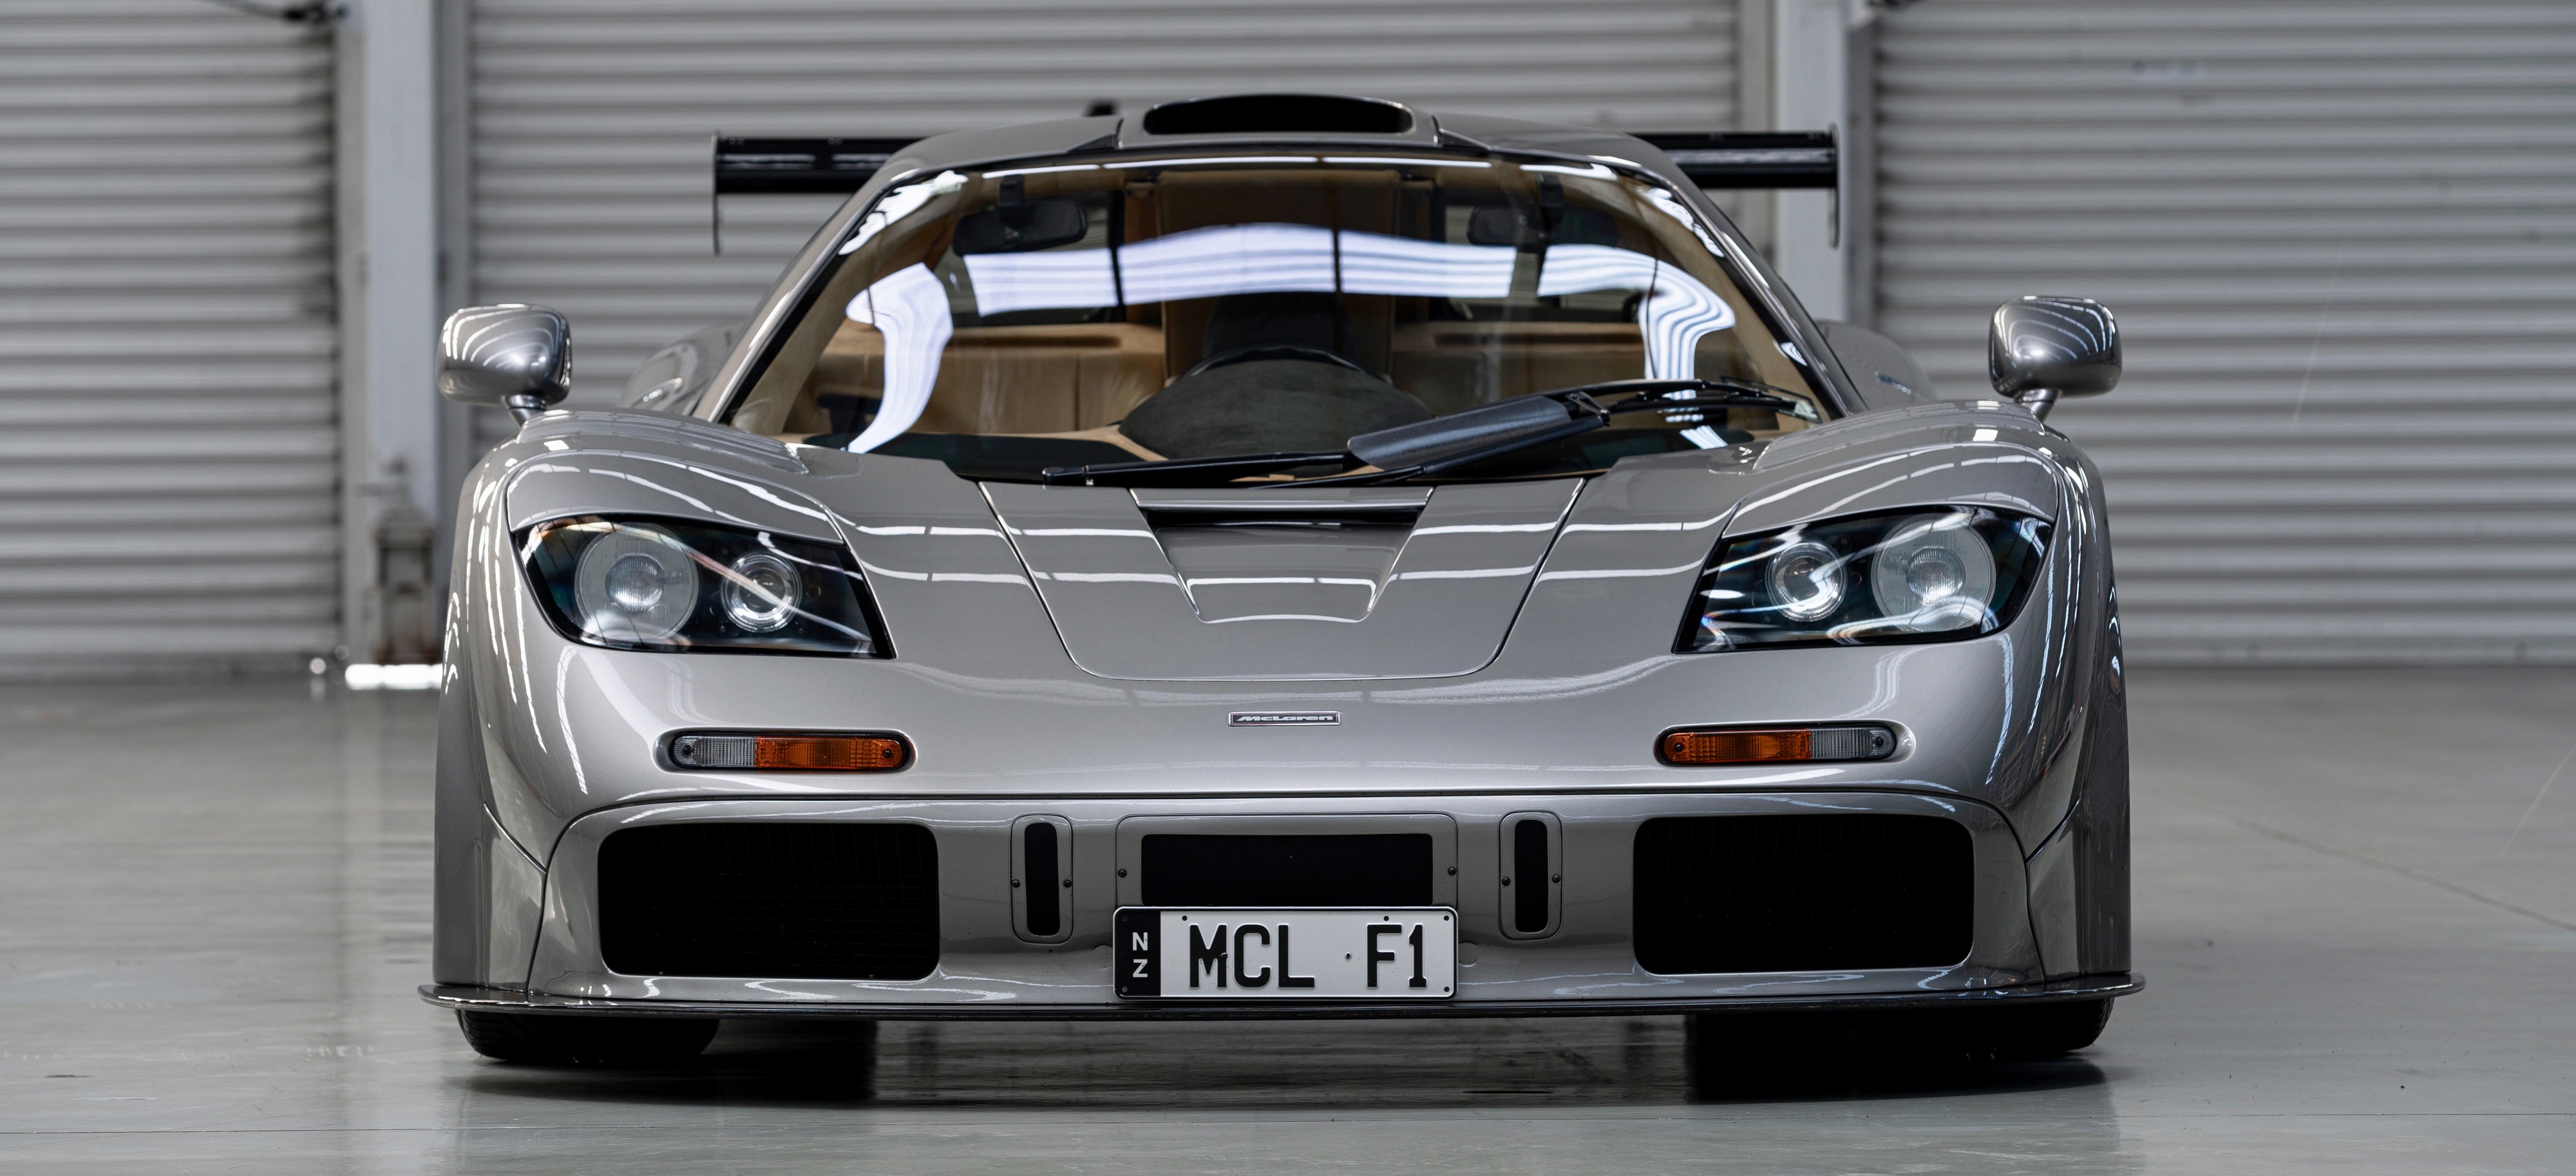 McLaren F1, McLaren F1 with LM specification consigned to RM Sotheby’s Monterey auction, ClassicCars.com Journal